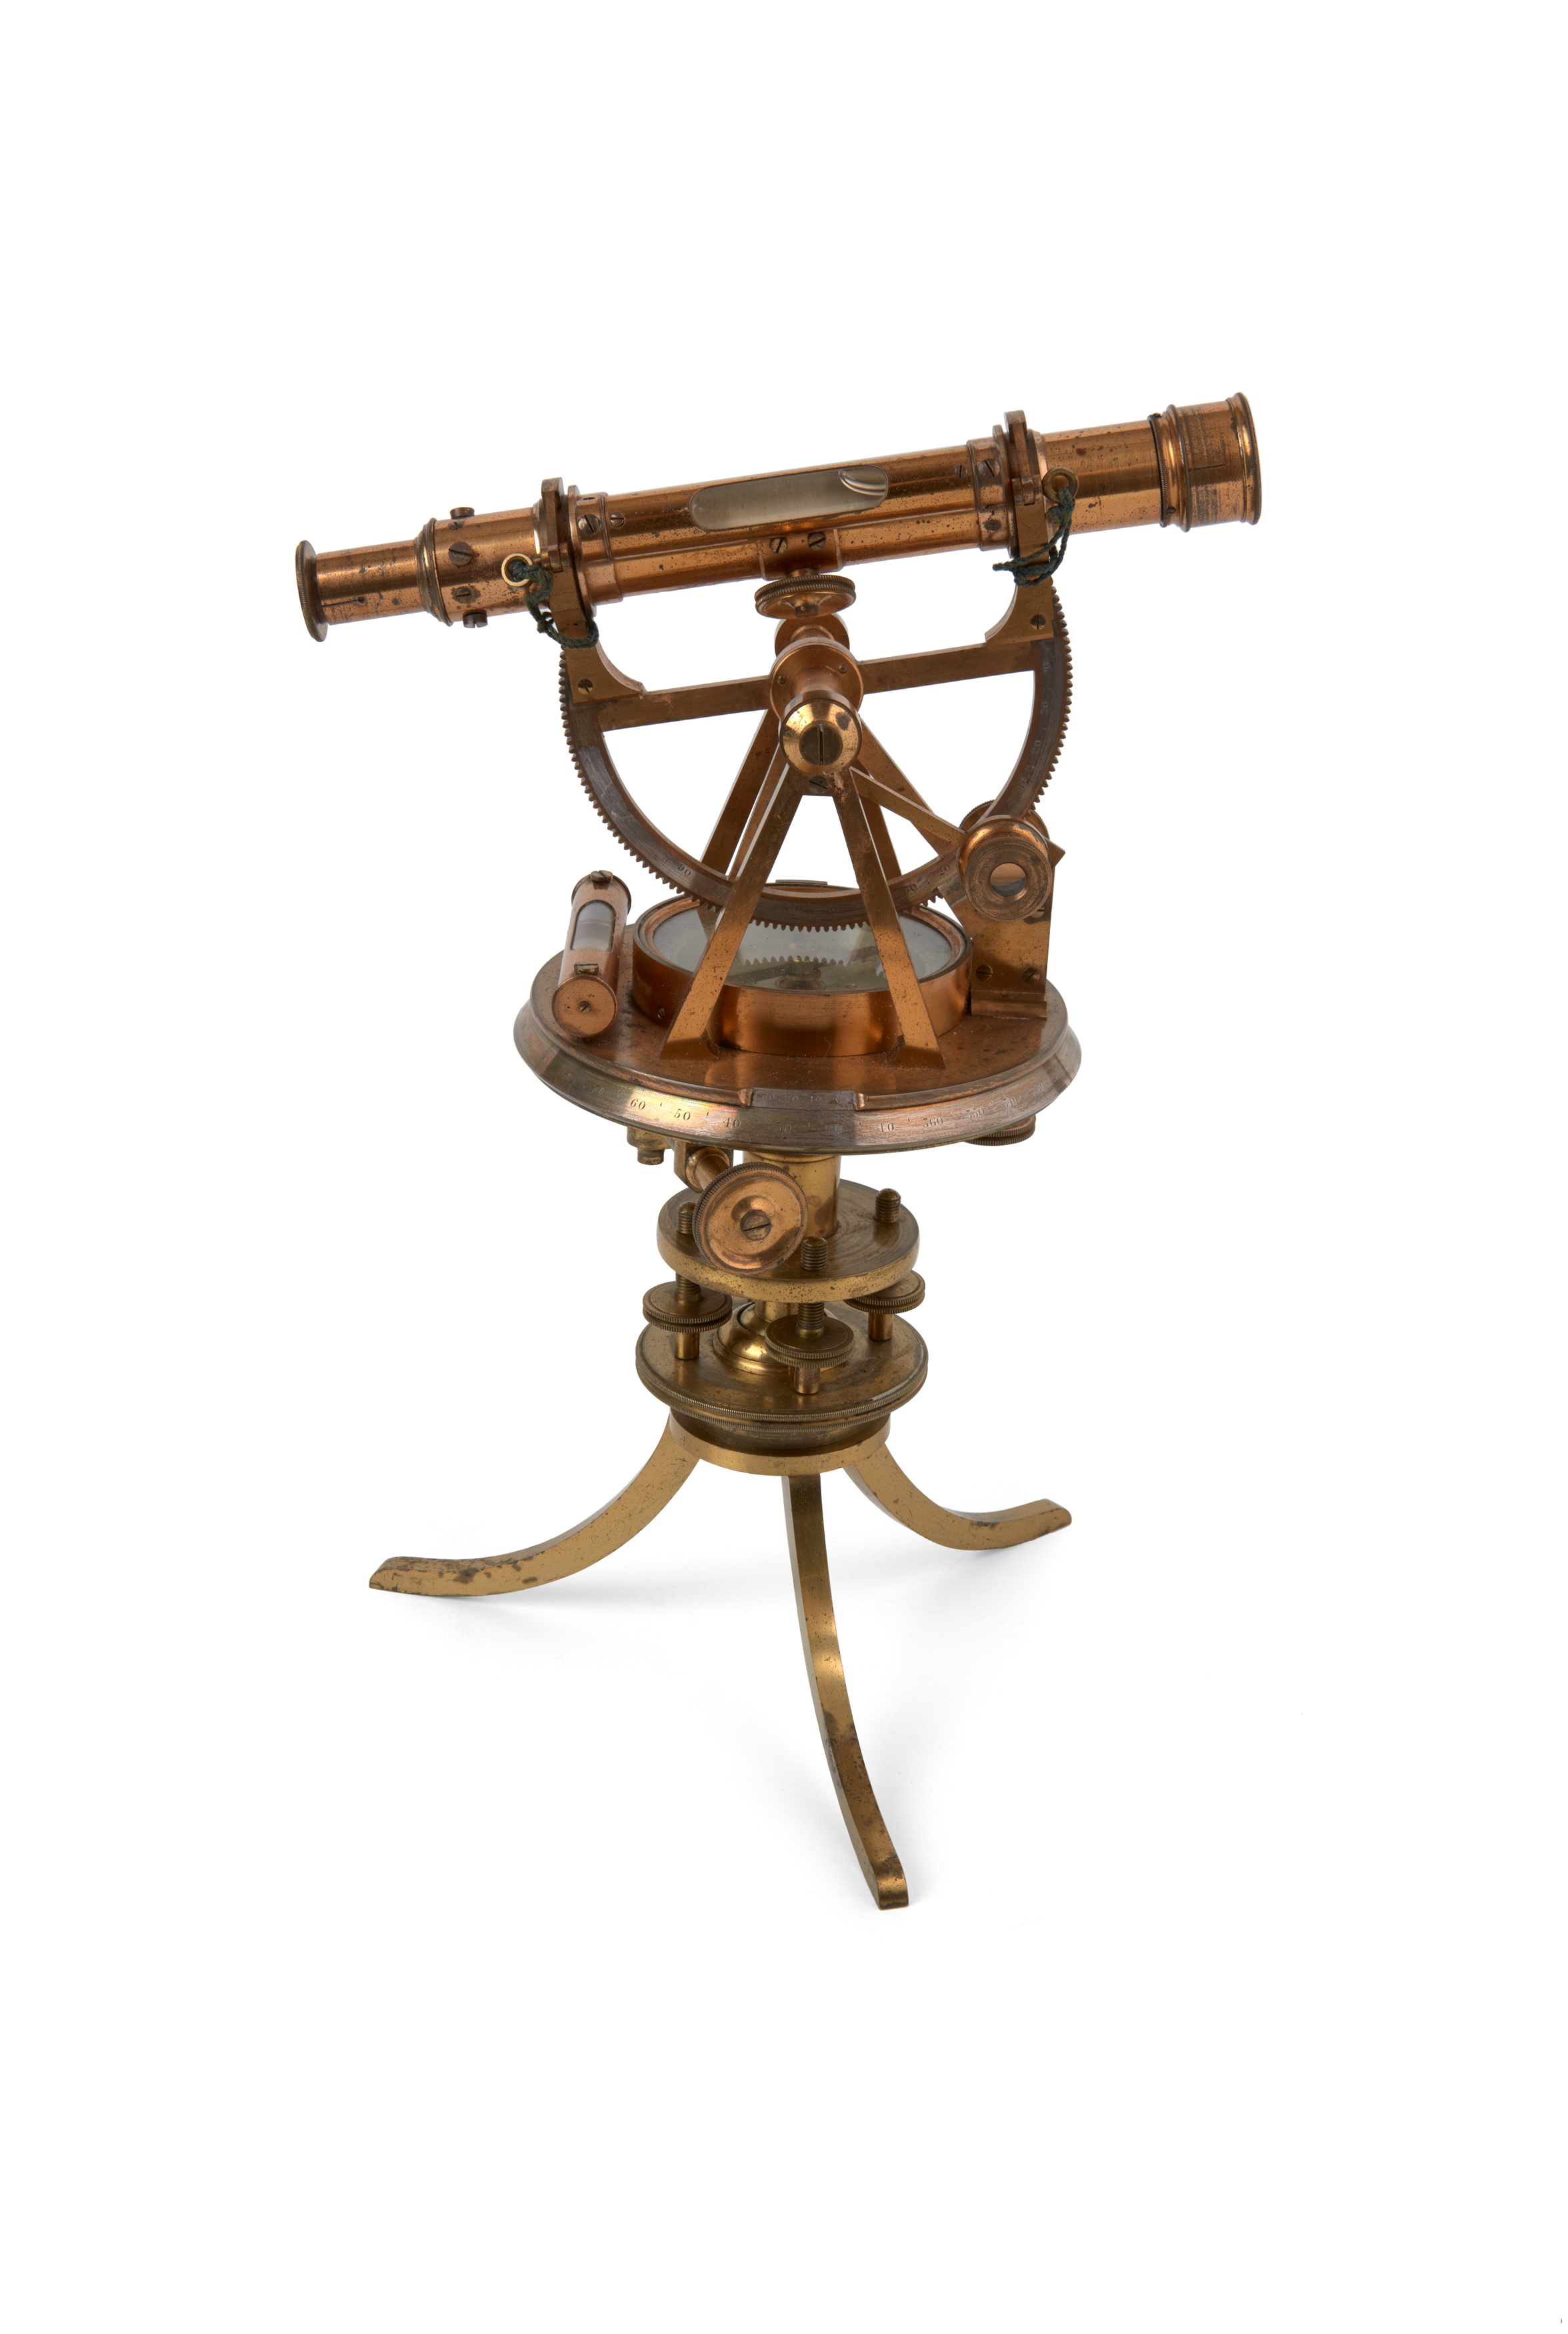 Theodolite made by William Cary, London, England